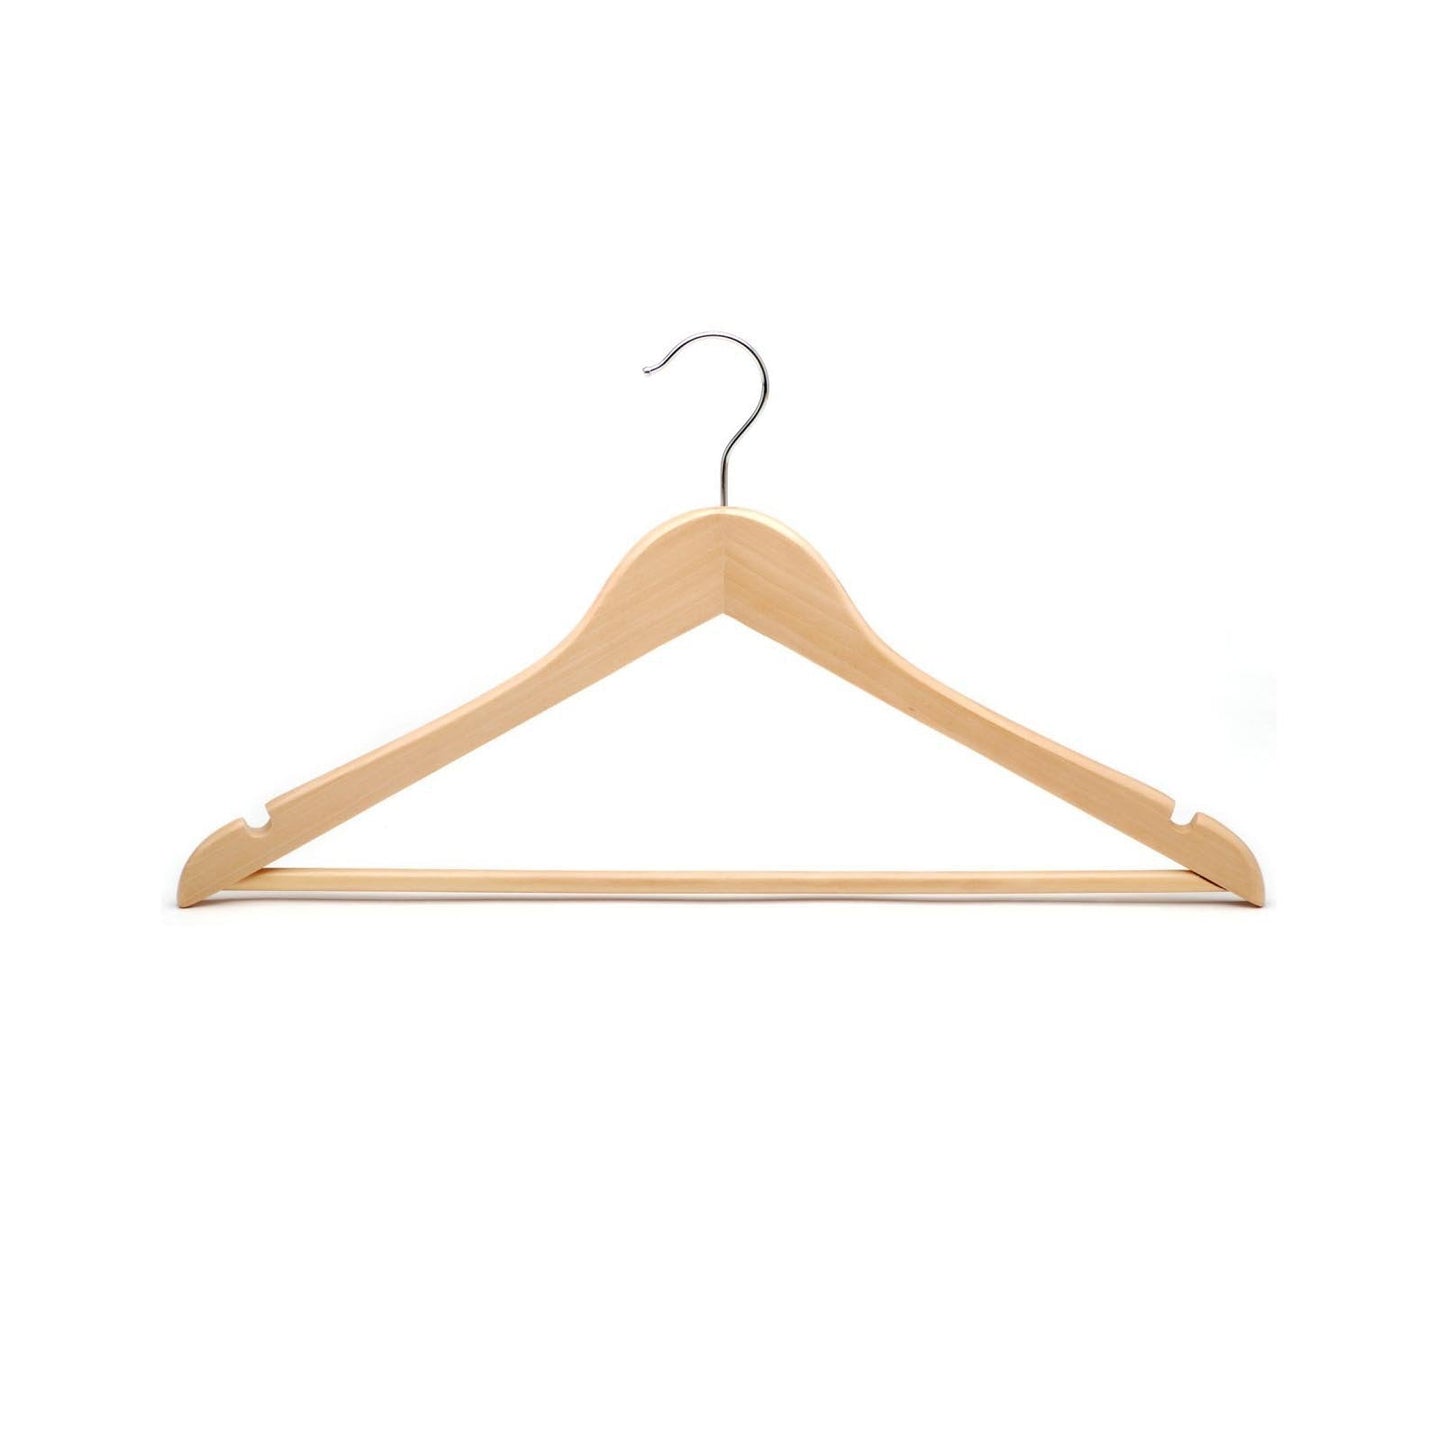 Wooden Universal High Quality Clothes Hanger 44cm 0713 (Parcel Rate)